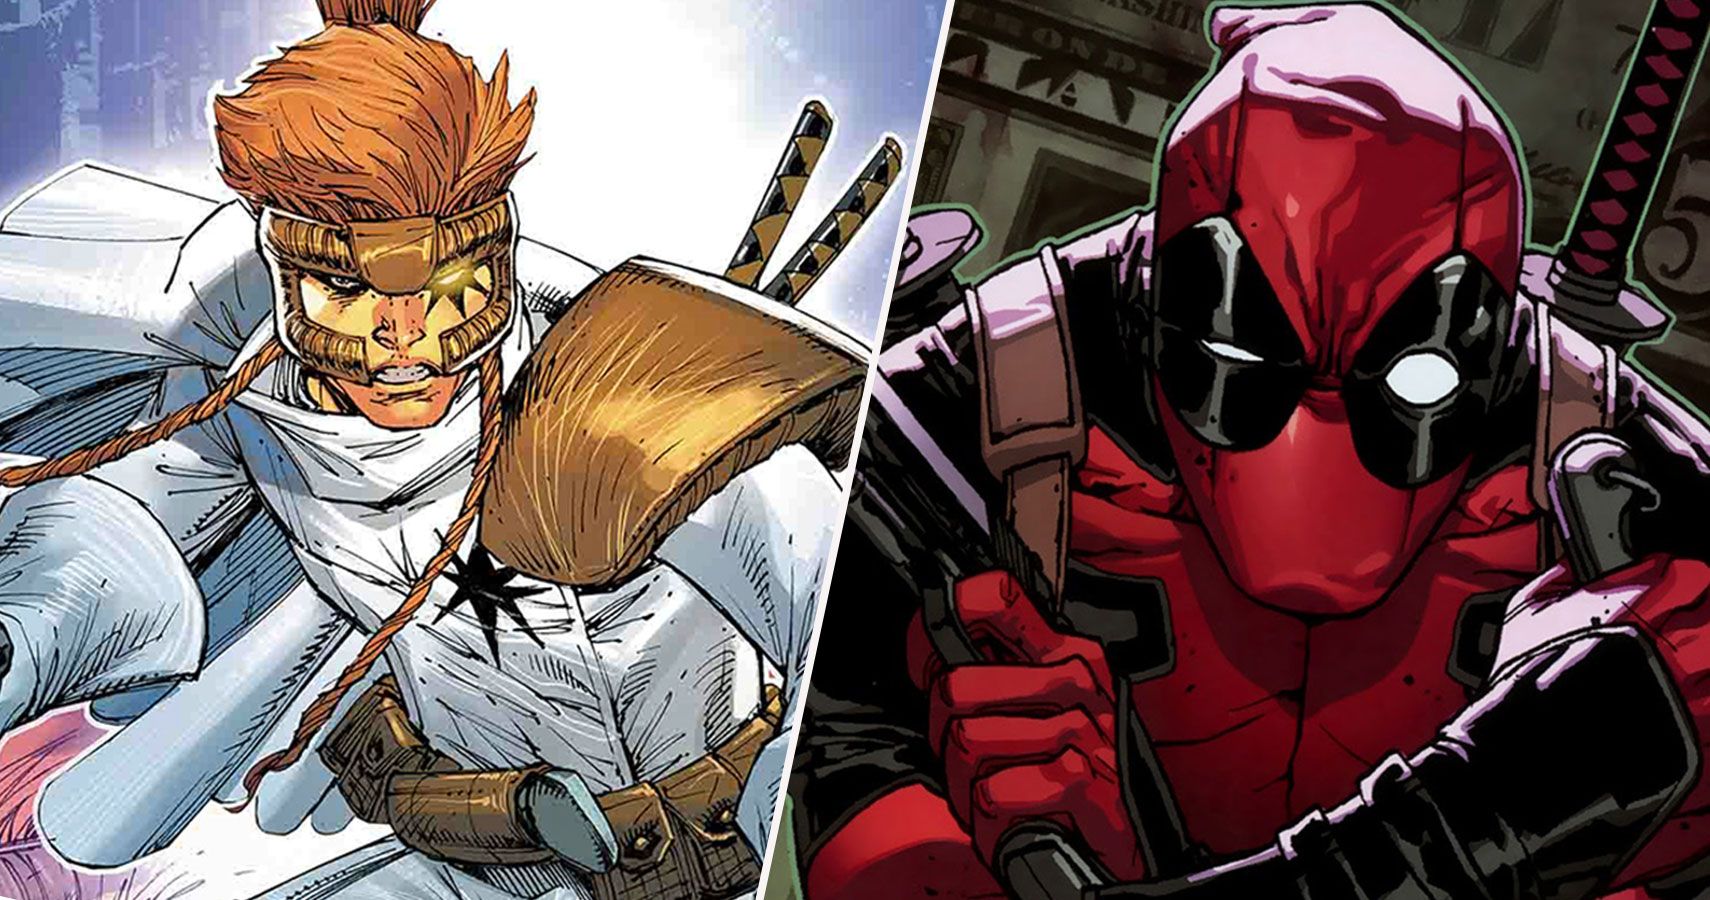 X Force The Deadliest Members From Marvel S X Men Spinoff Ranked